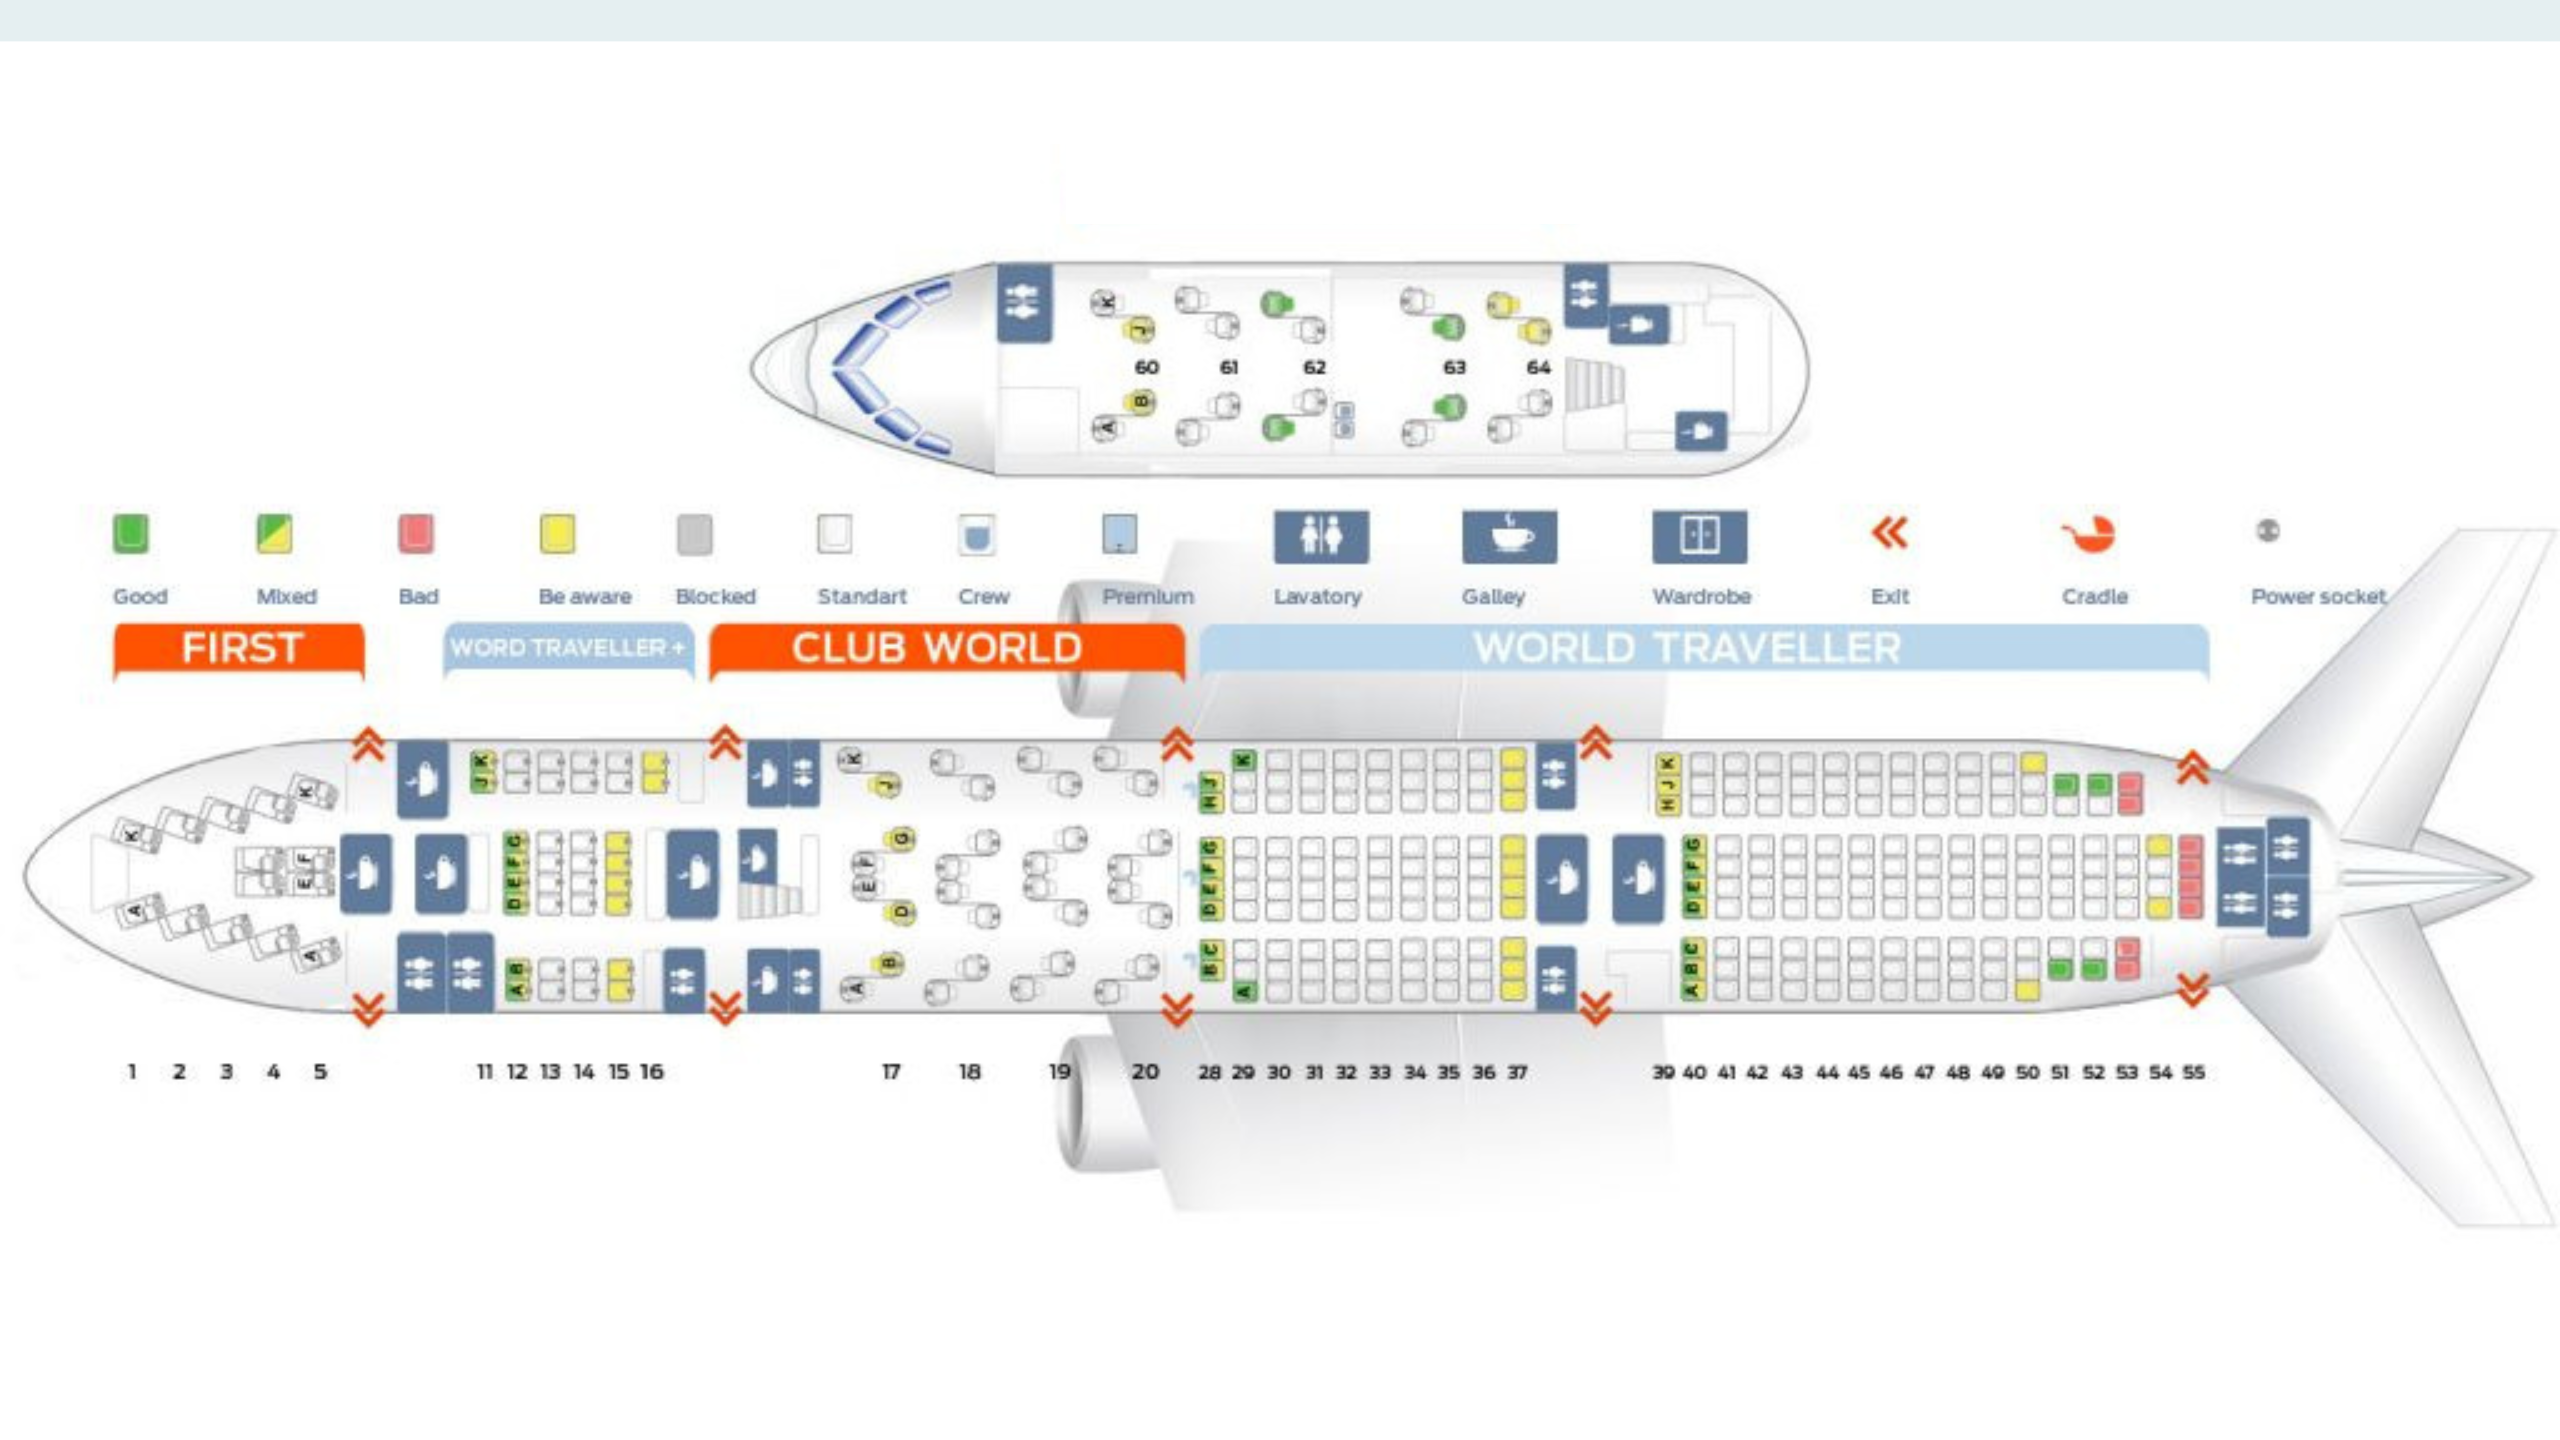 Overview of British Airways Seat Selection